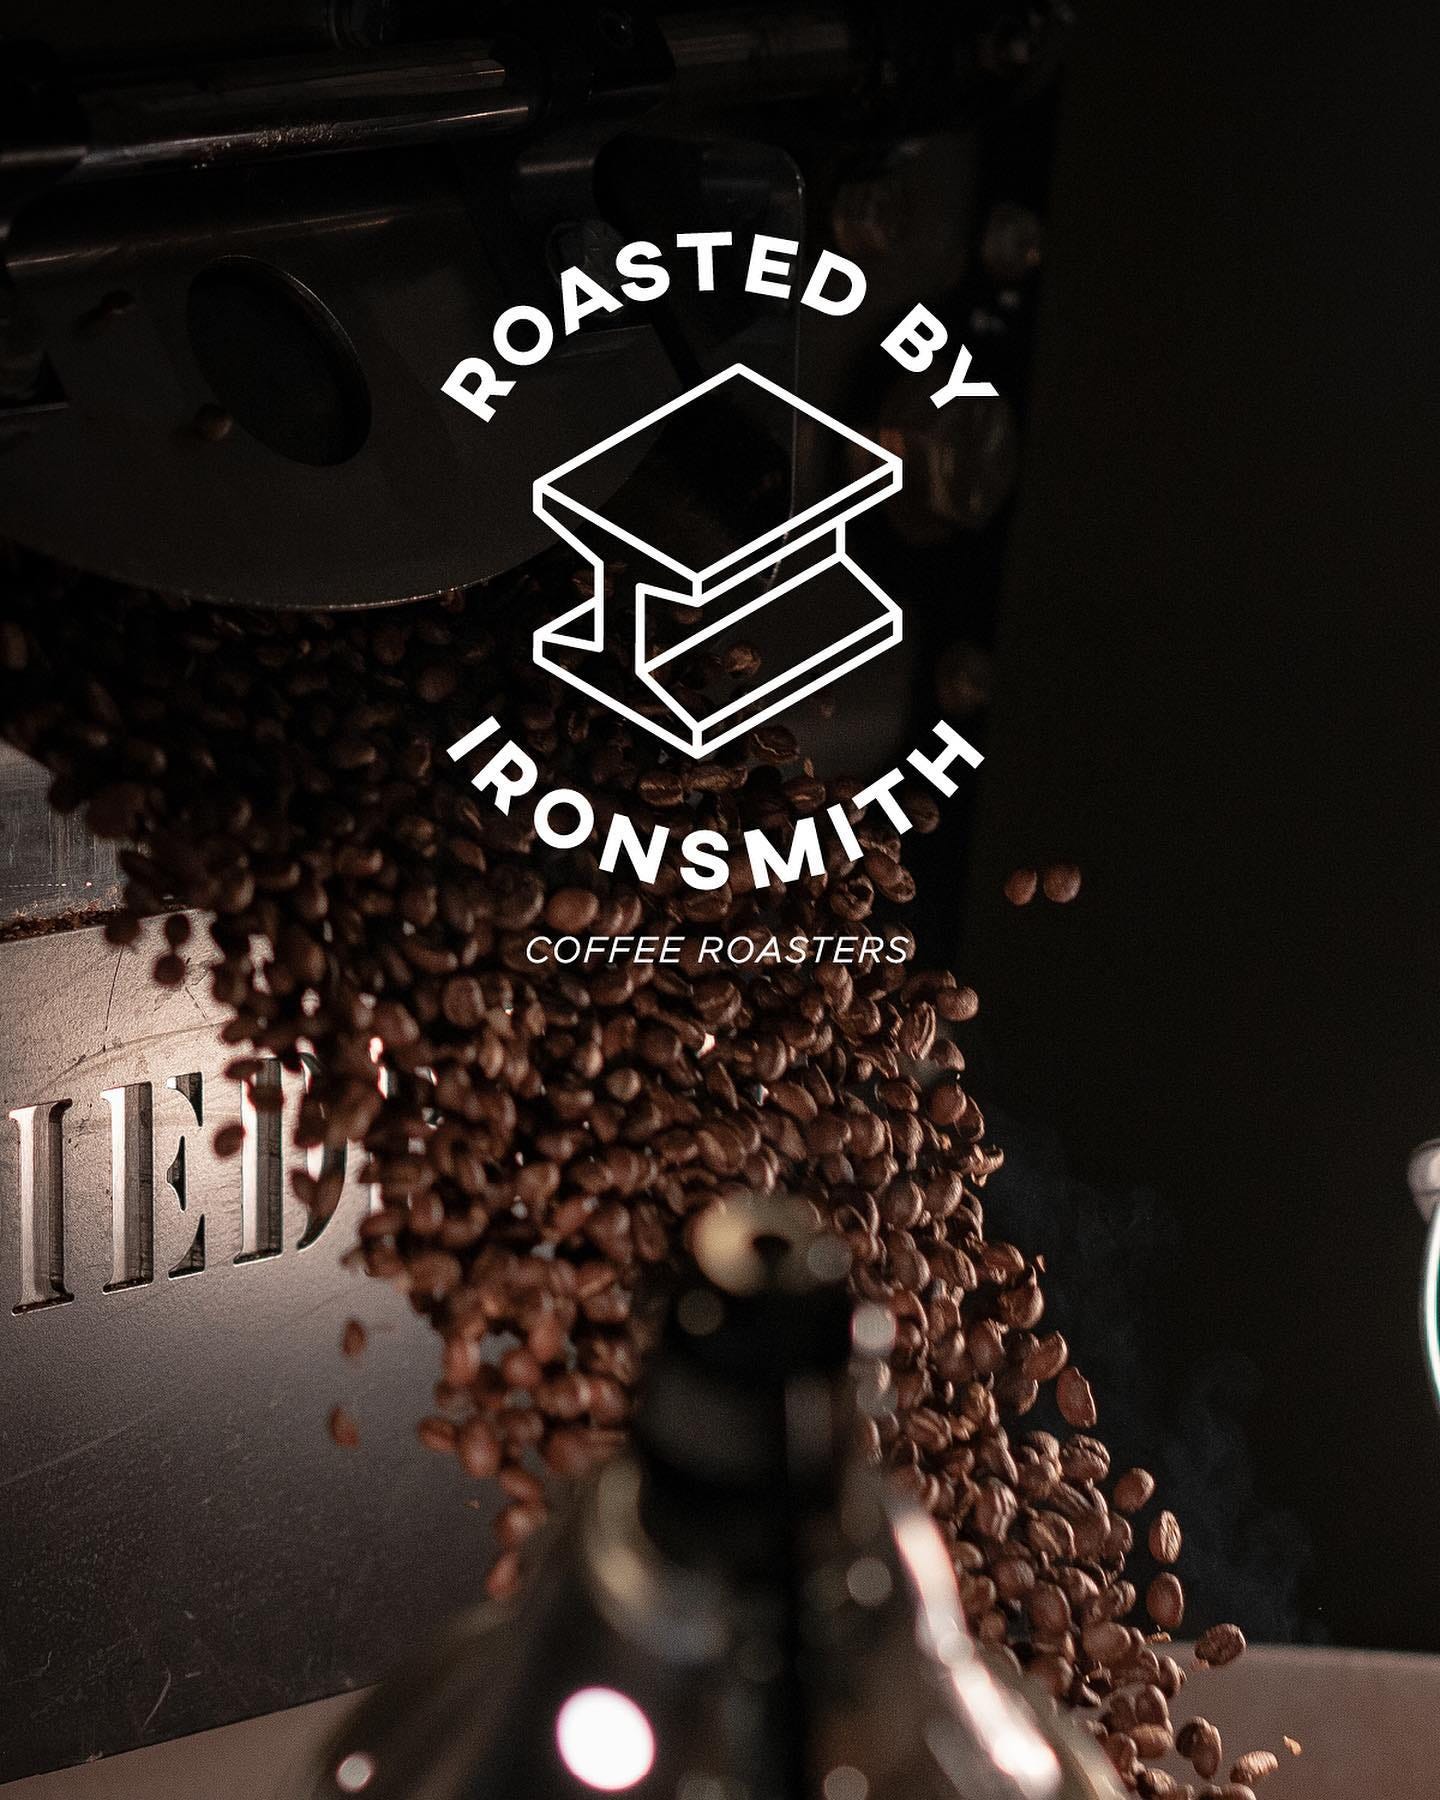 The Ironsmith Coffee Logo imposed over coffee beans in a coffee bean roasting machine.